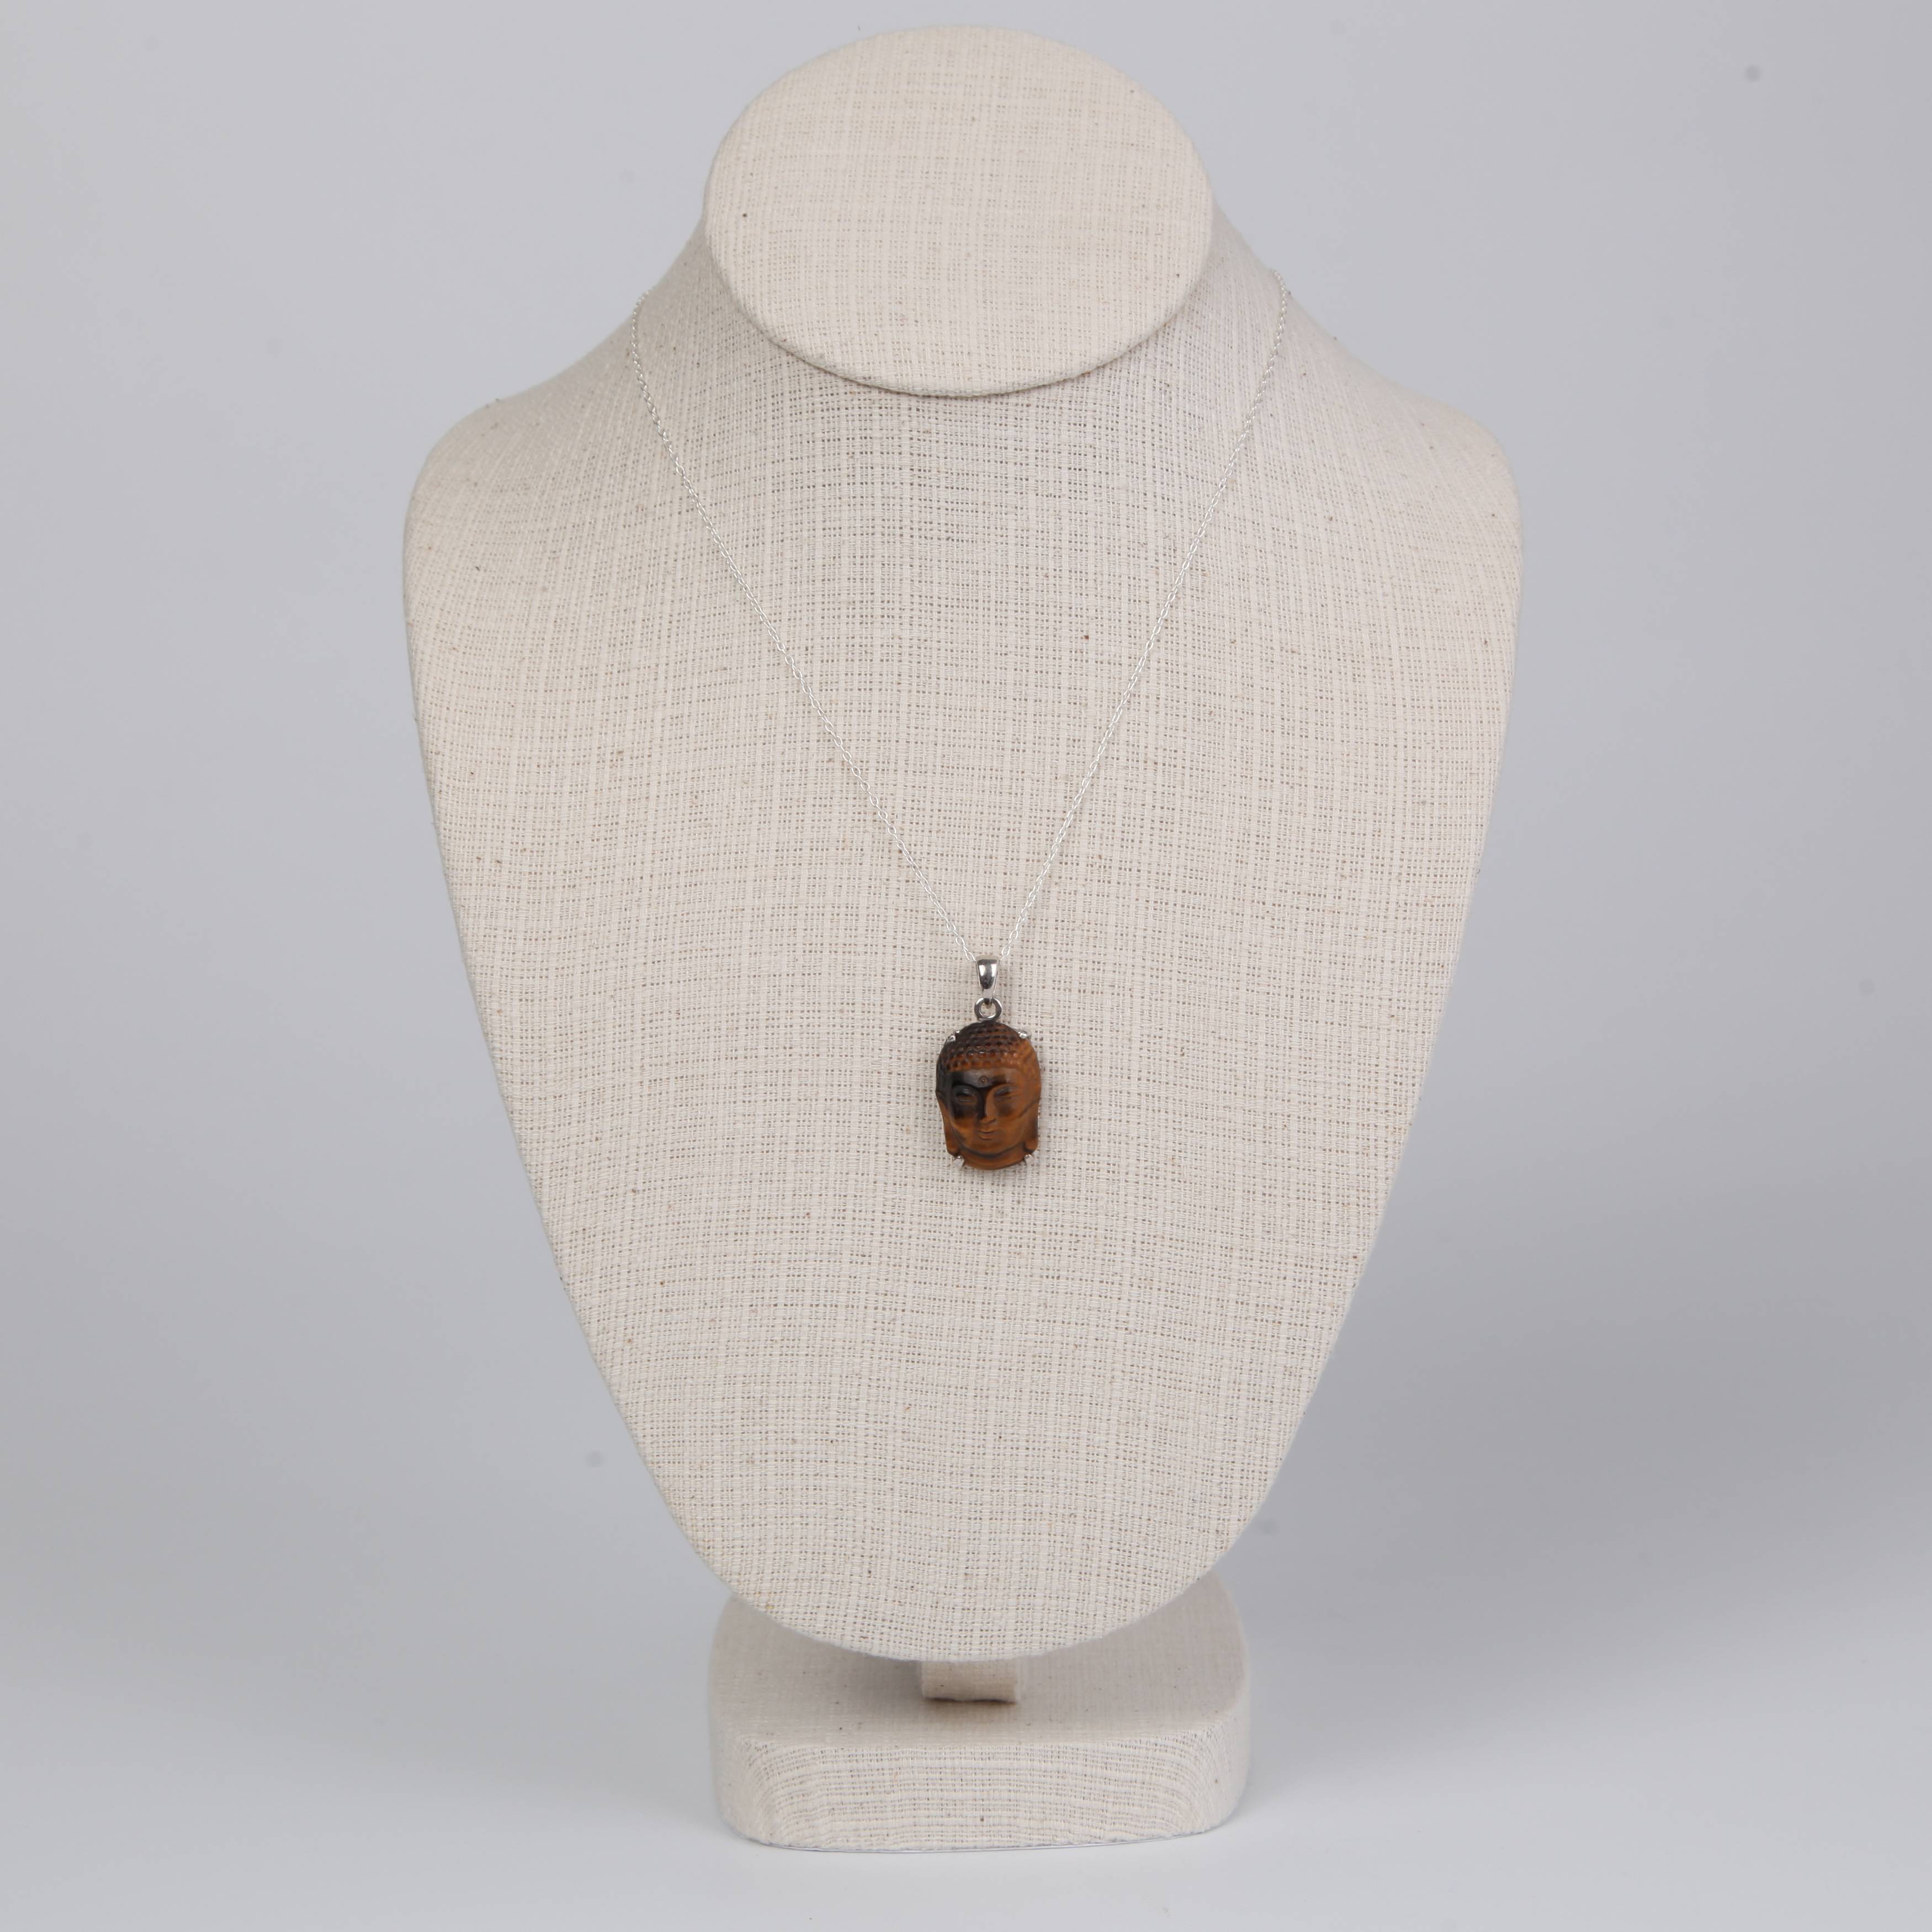 Tiger's Eye Buddha Head Pendant with Sterling Silver Small